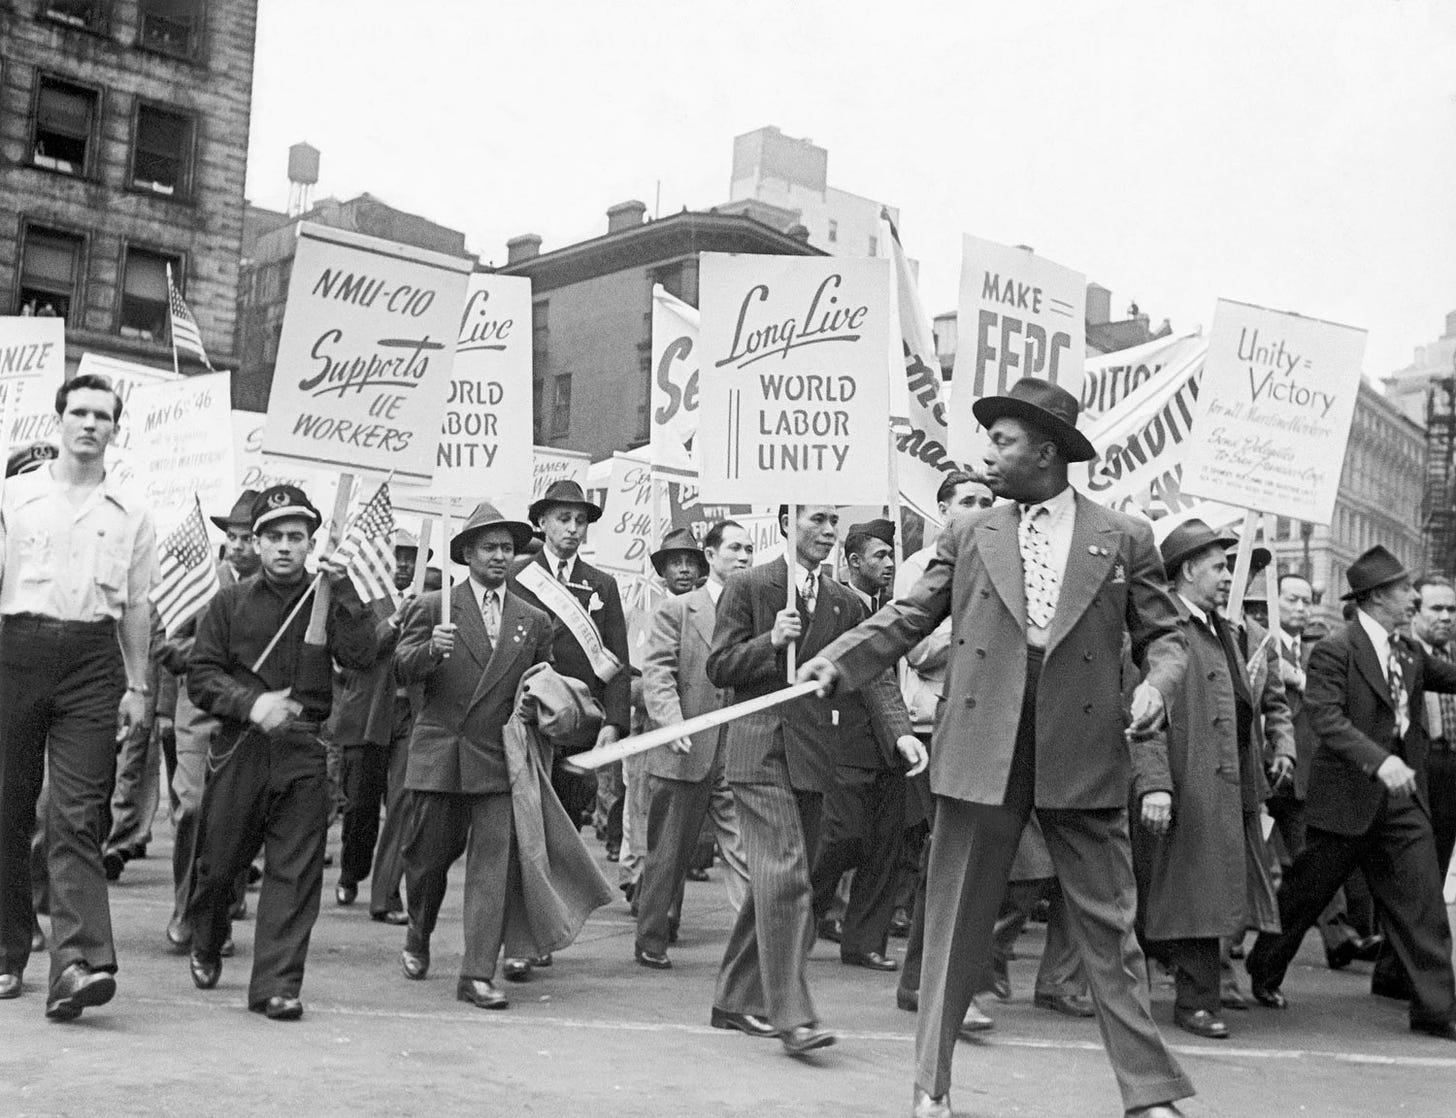 Workers of various affiliations march together at a 1946 May Day parade in New York City. Men with union placards 